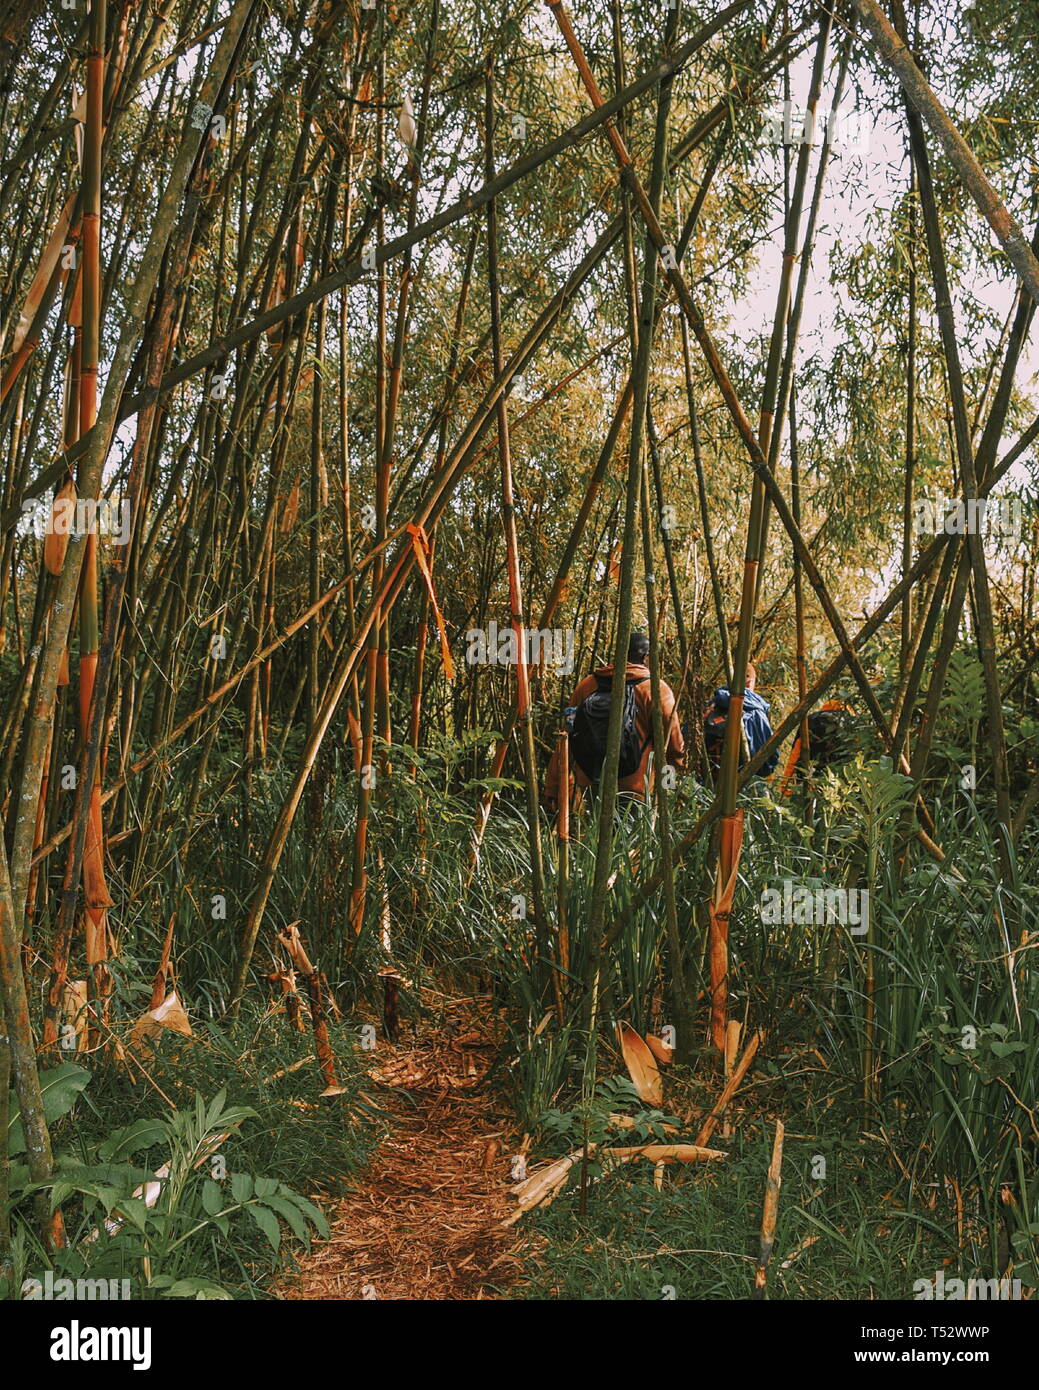 A group of hikers in the bamboo zone on the flanks of Mount Kenya,Aberdare Ranges Stock Photo